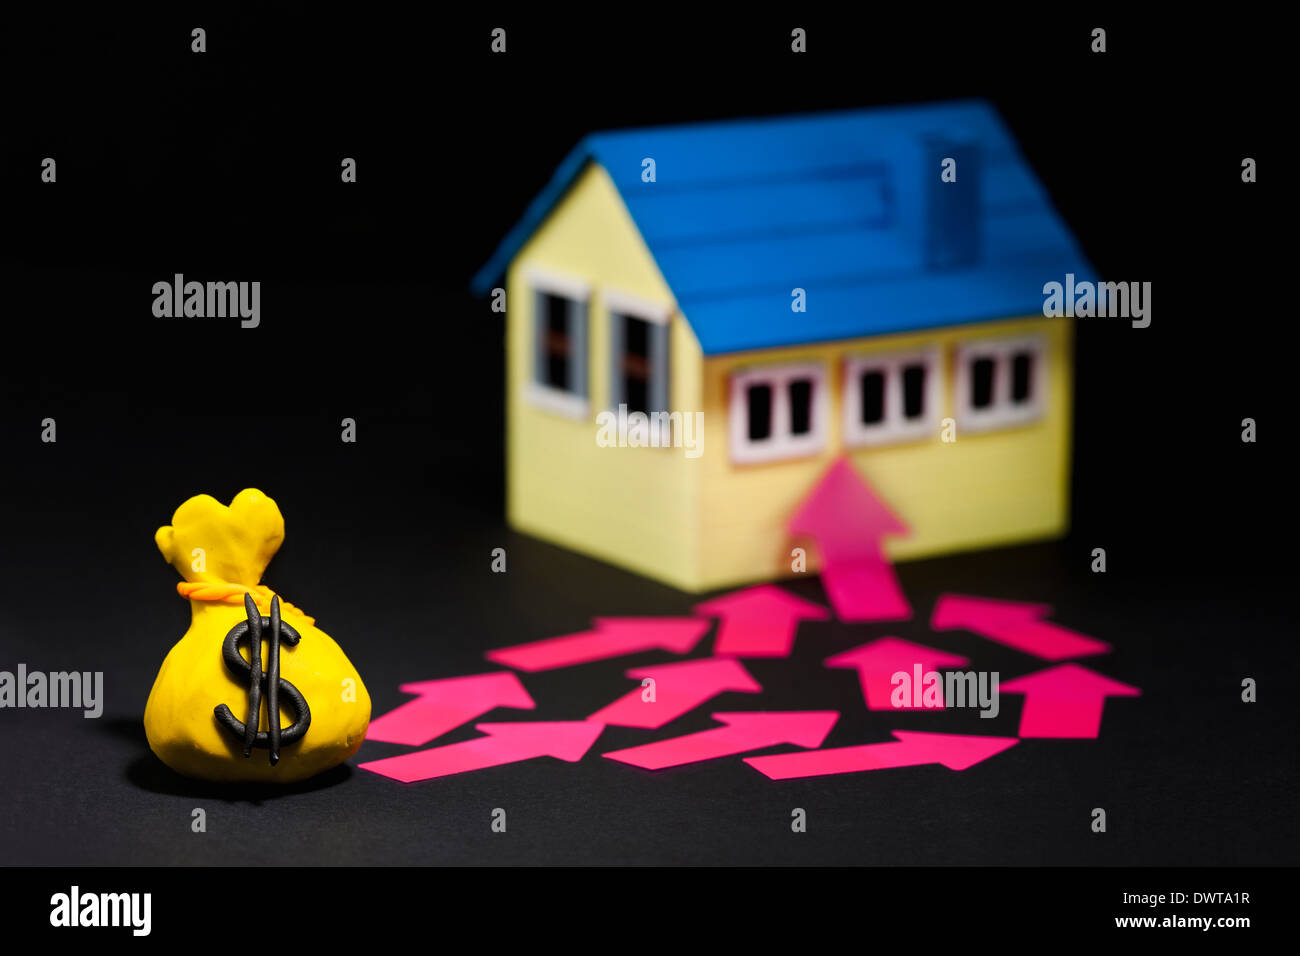 arrows pointing from money bag to house Stock Photo